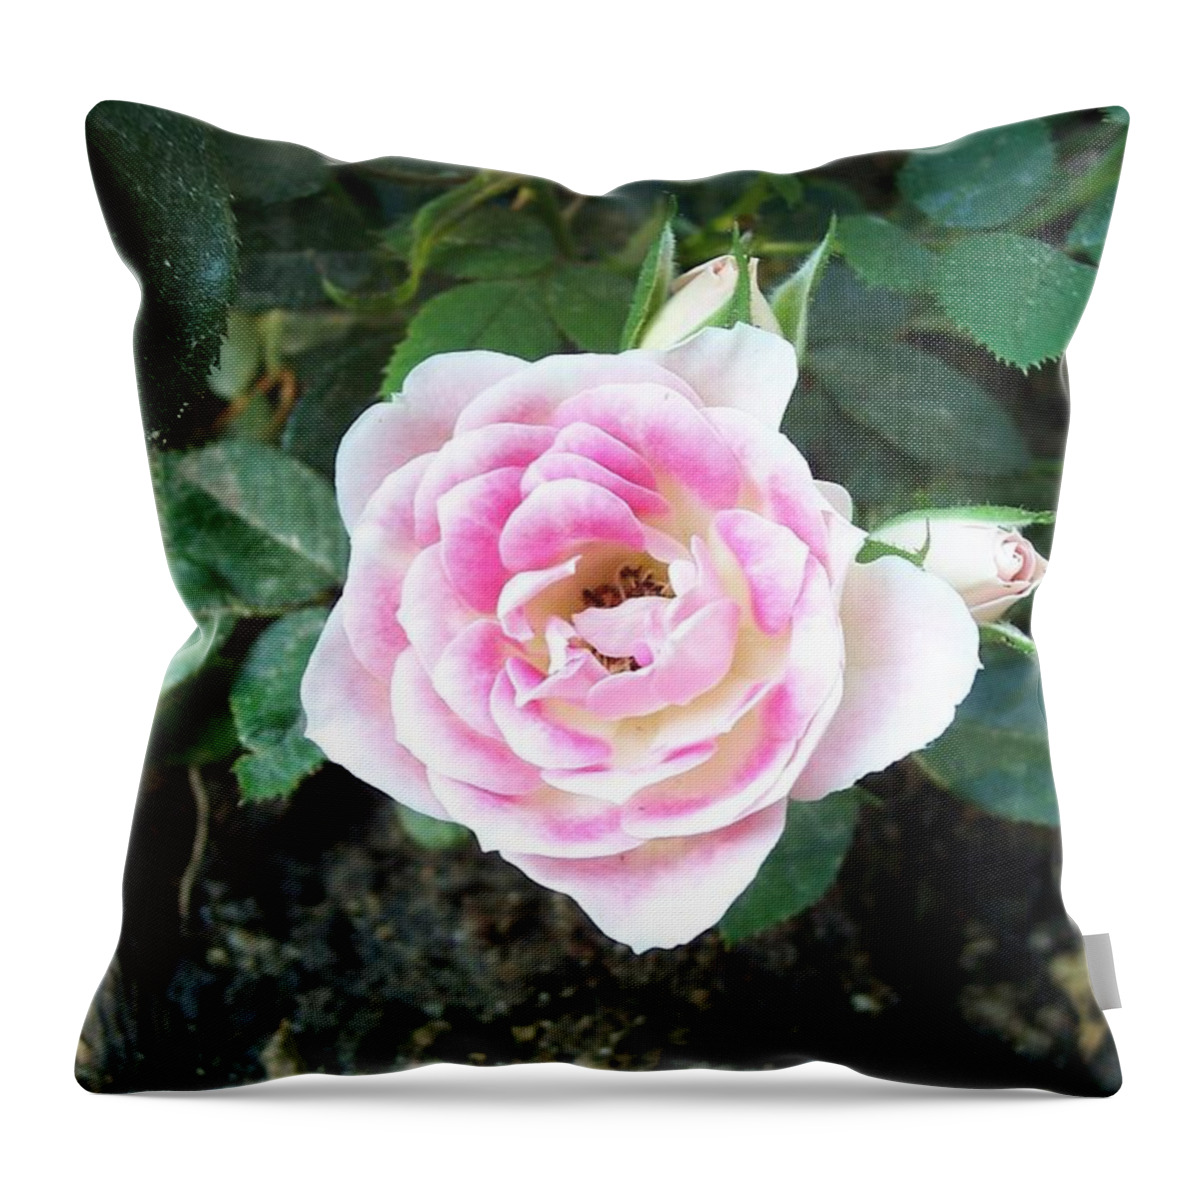 Rose Throw Pillow featuring the photograph Miniature Rose by Michelle Miron-Rebbe